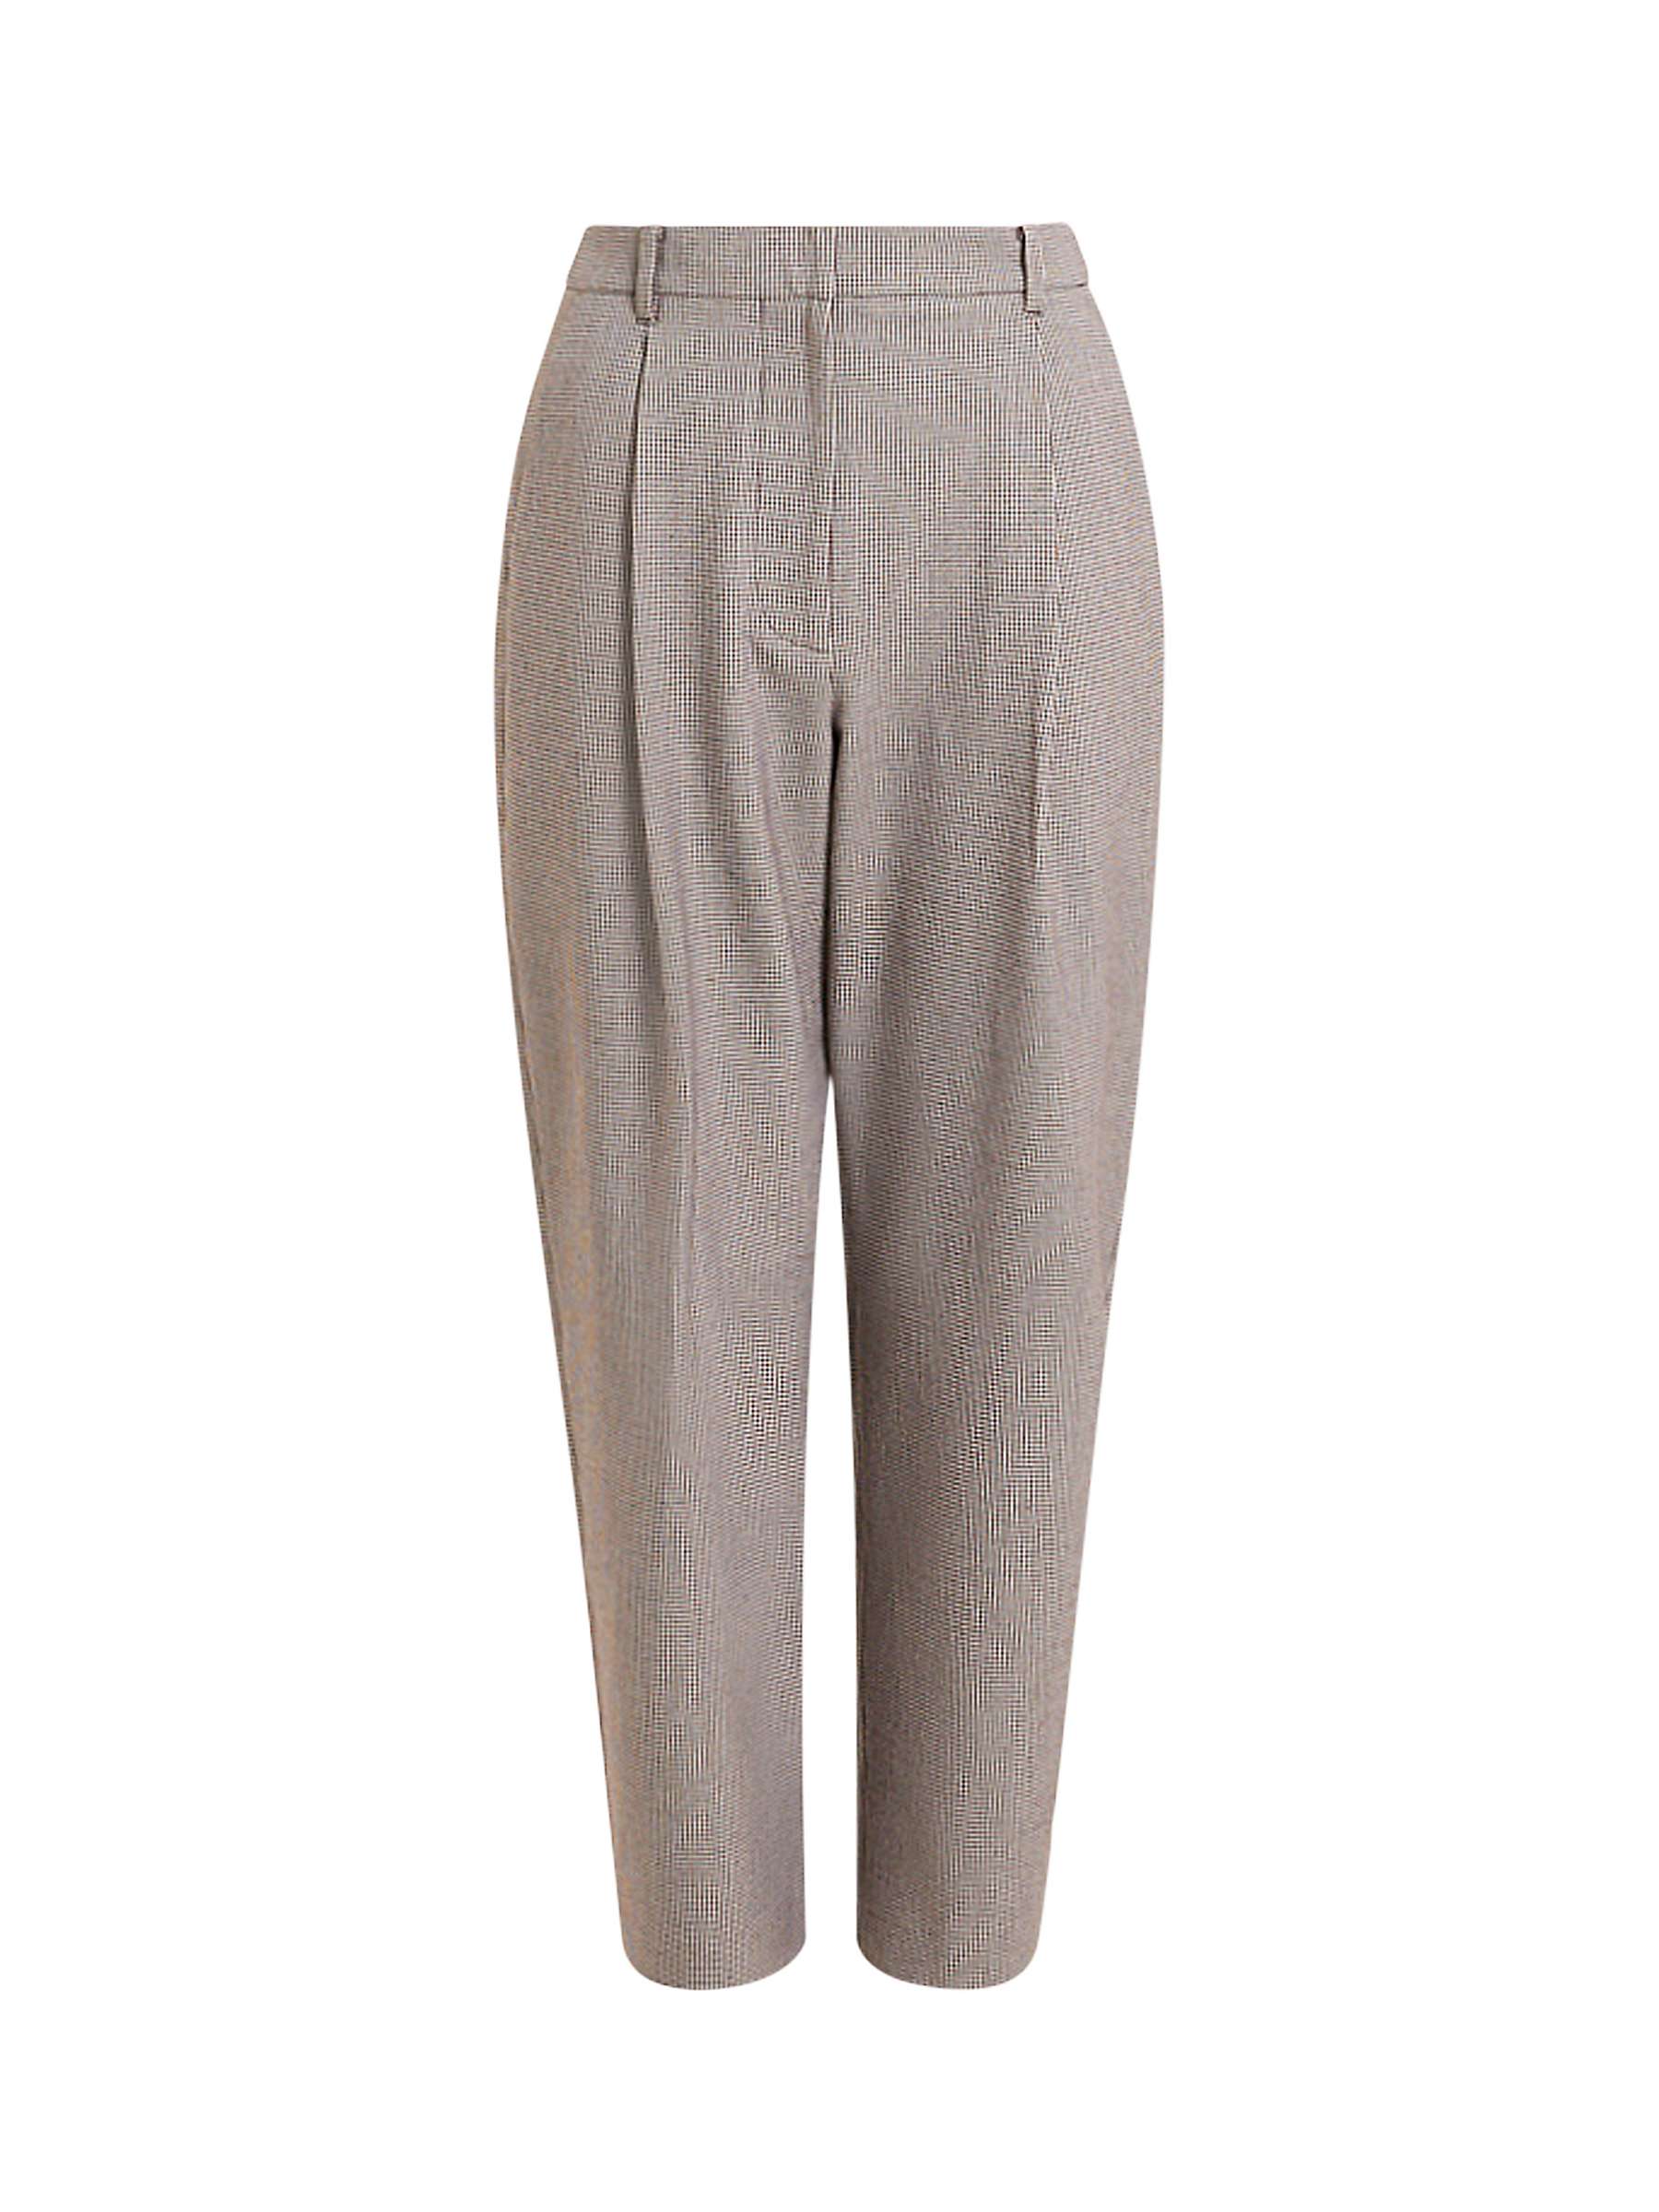 Buy Great Plains Mini Check Winter Trousers, Brown/Multi Online at johnlewis.com